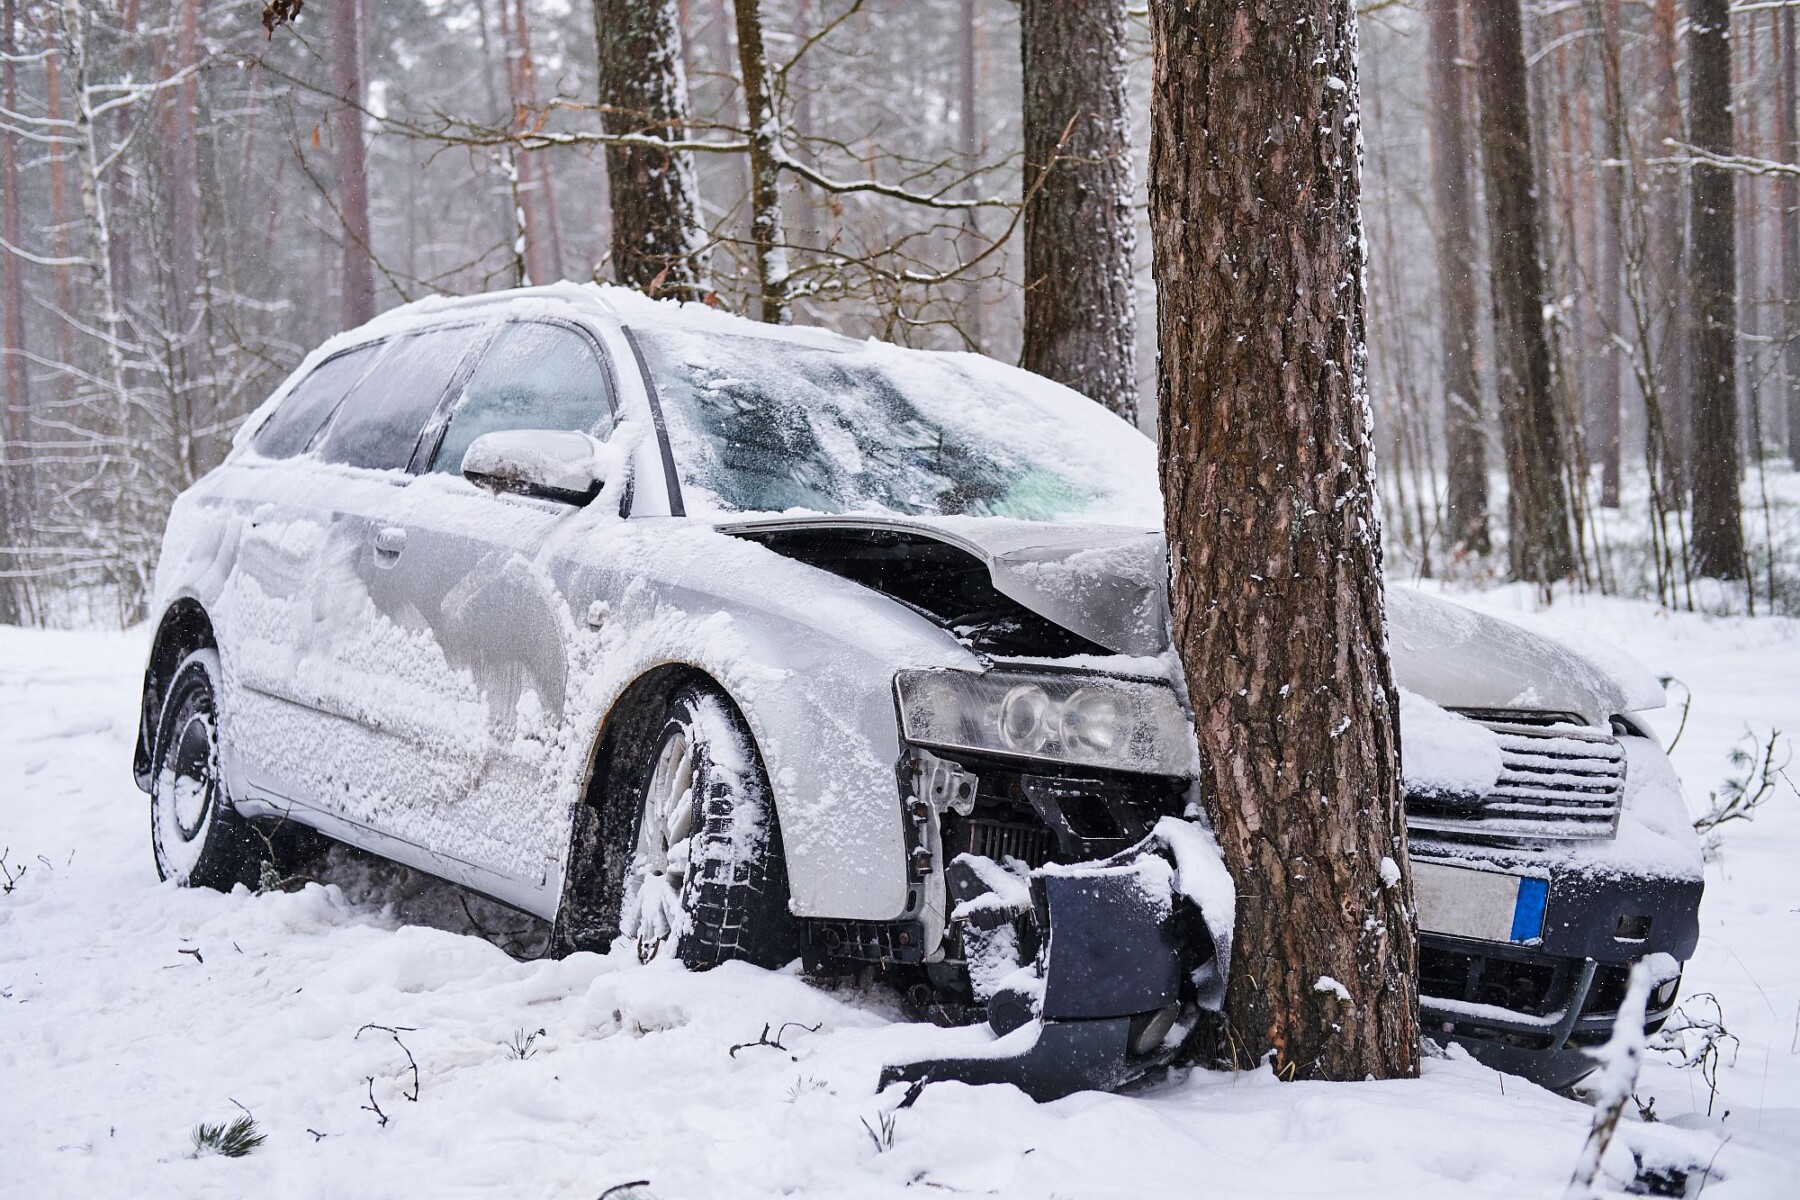 broken-car-crashes-into-tree-after-losing-control-slippery-road-snowy-forest-abandoned-car-after-accident